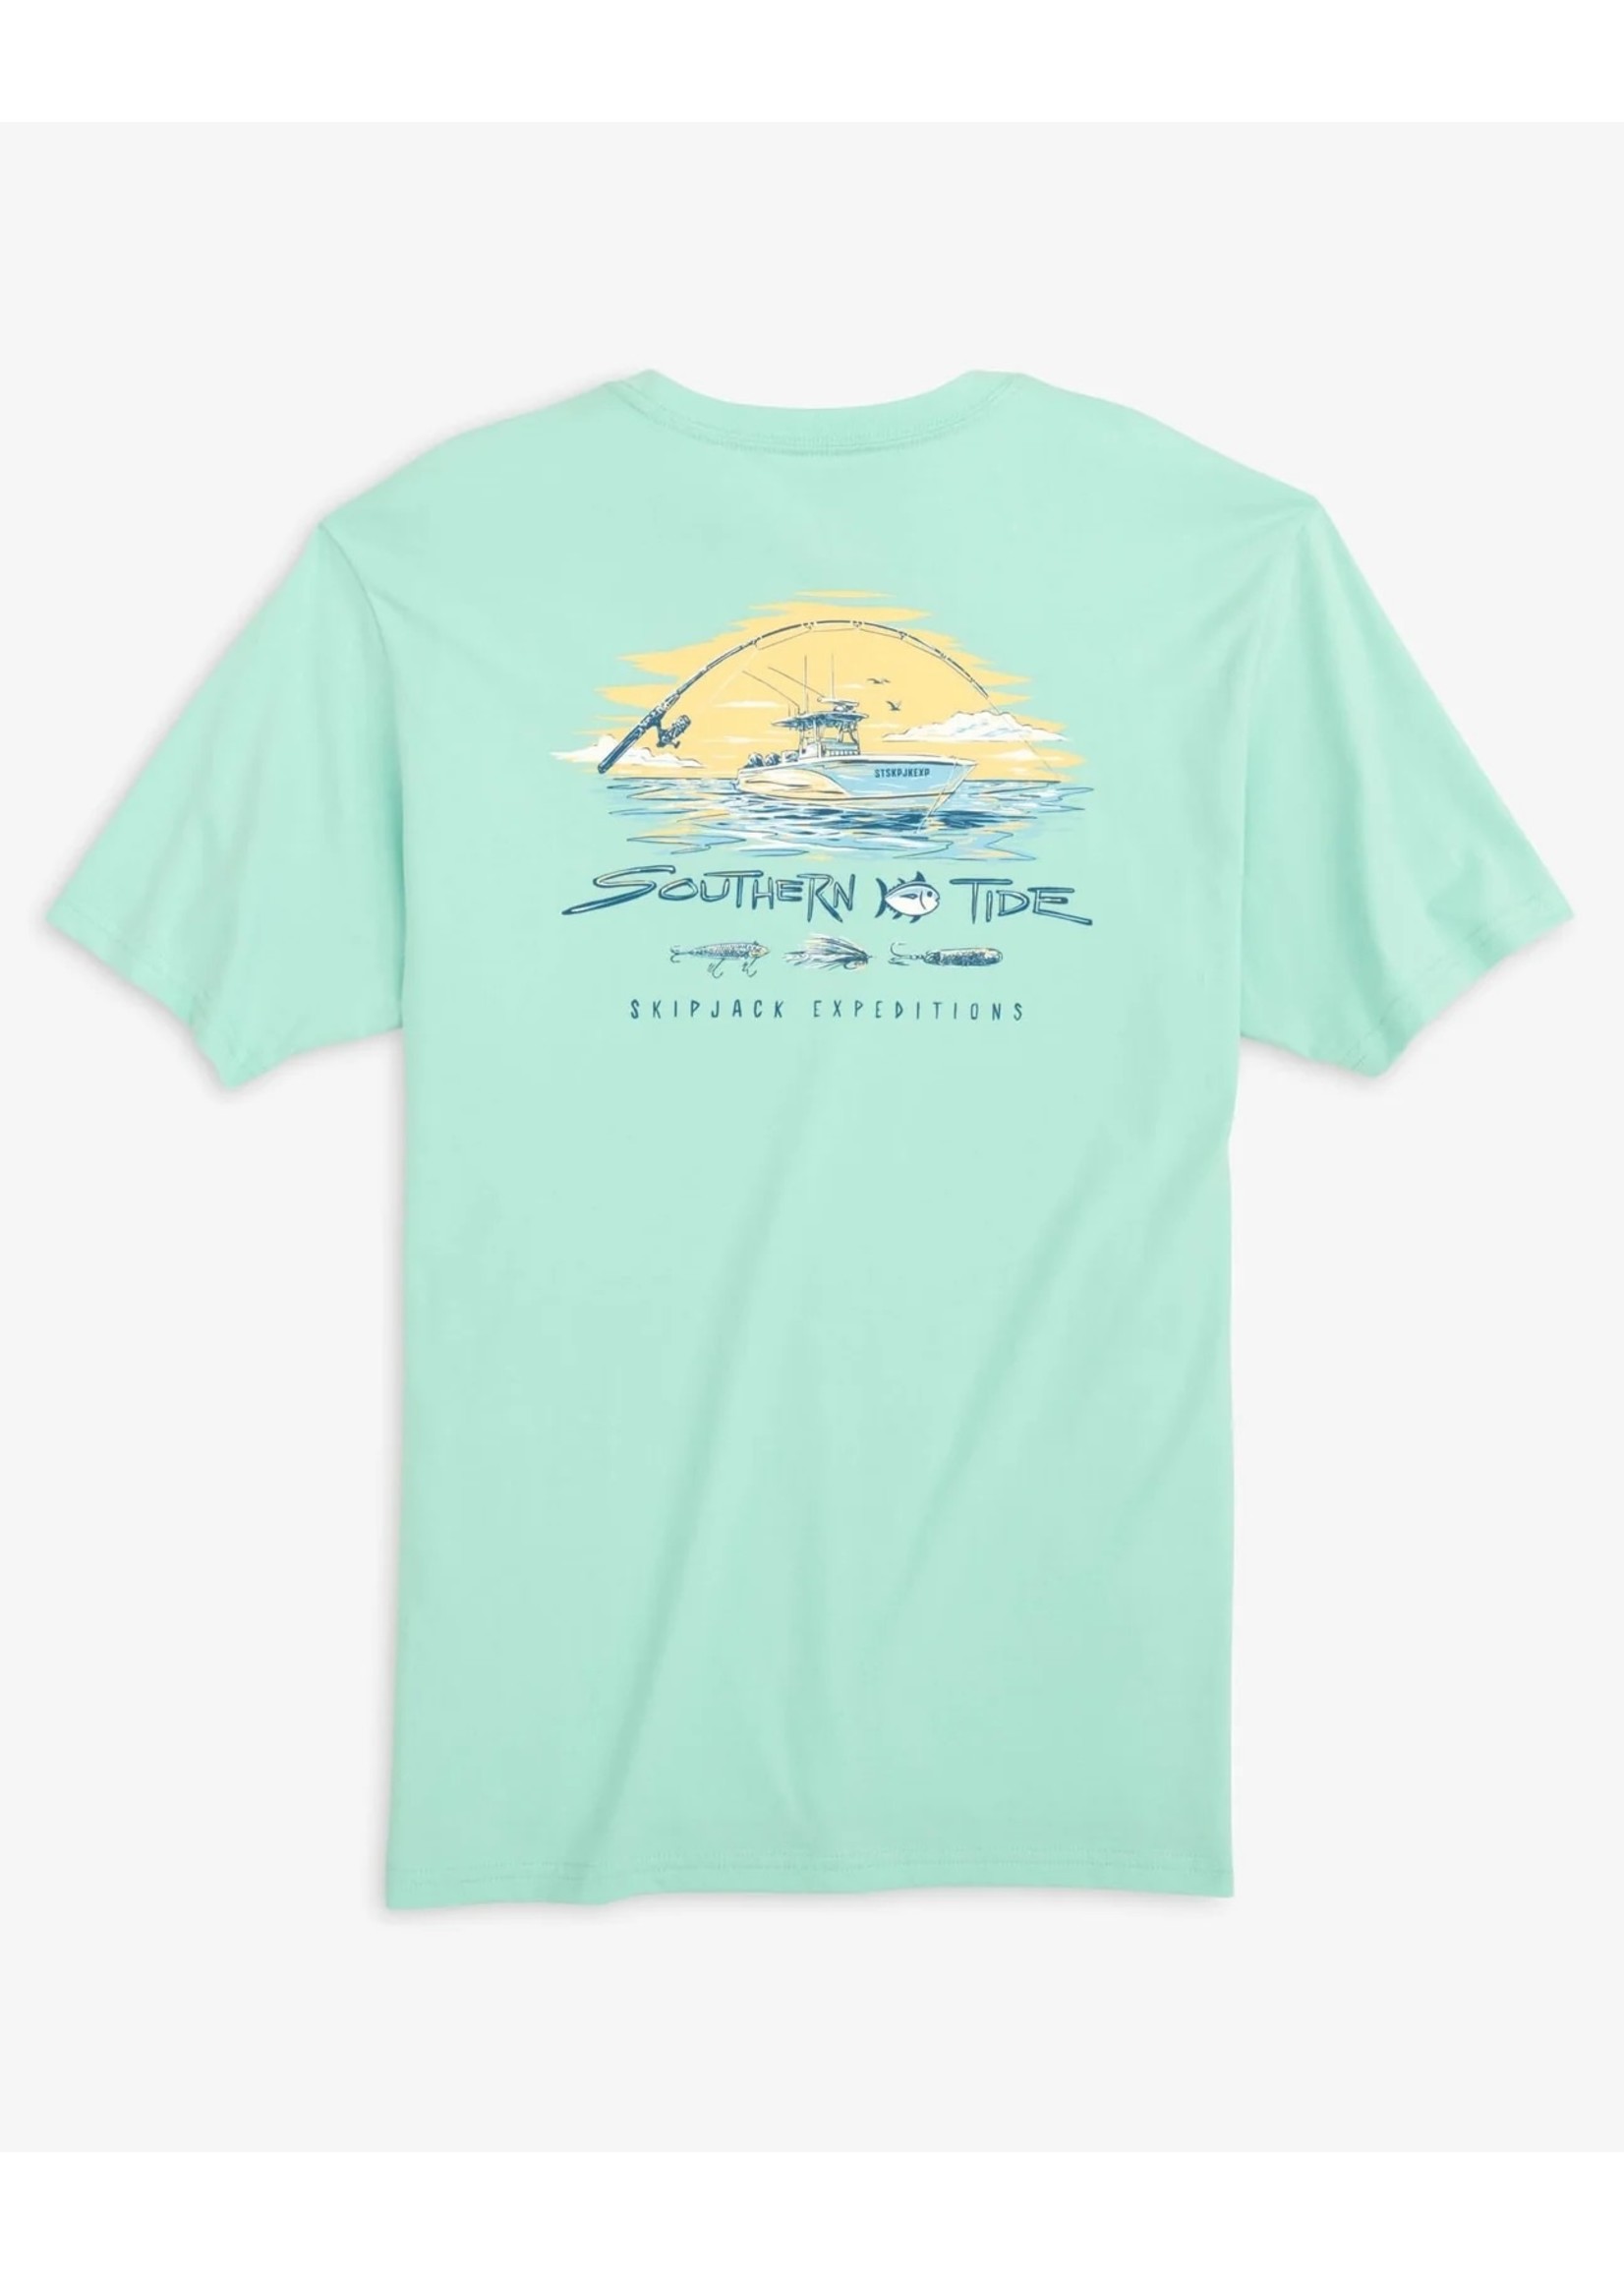 Southern Tide Southern Tide SS Expeditions Tee Baltic Tee